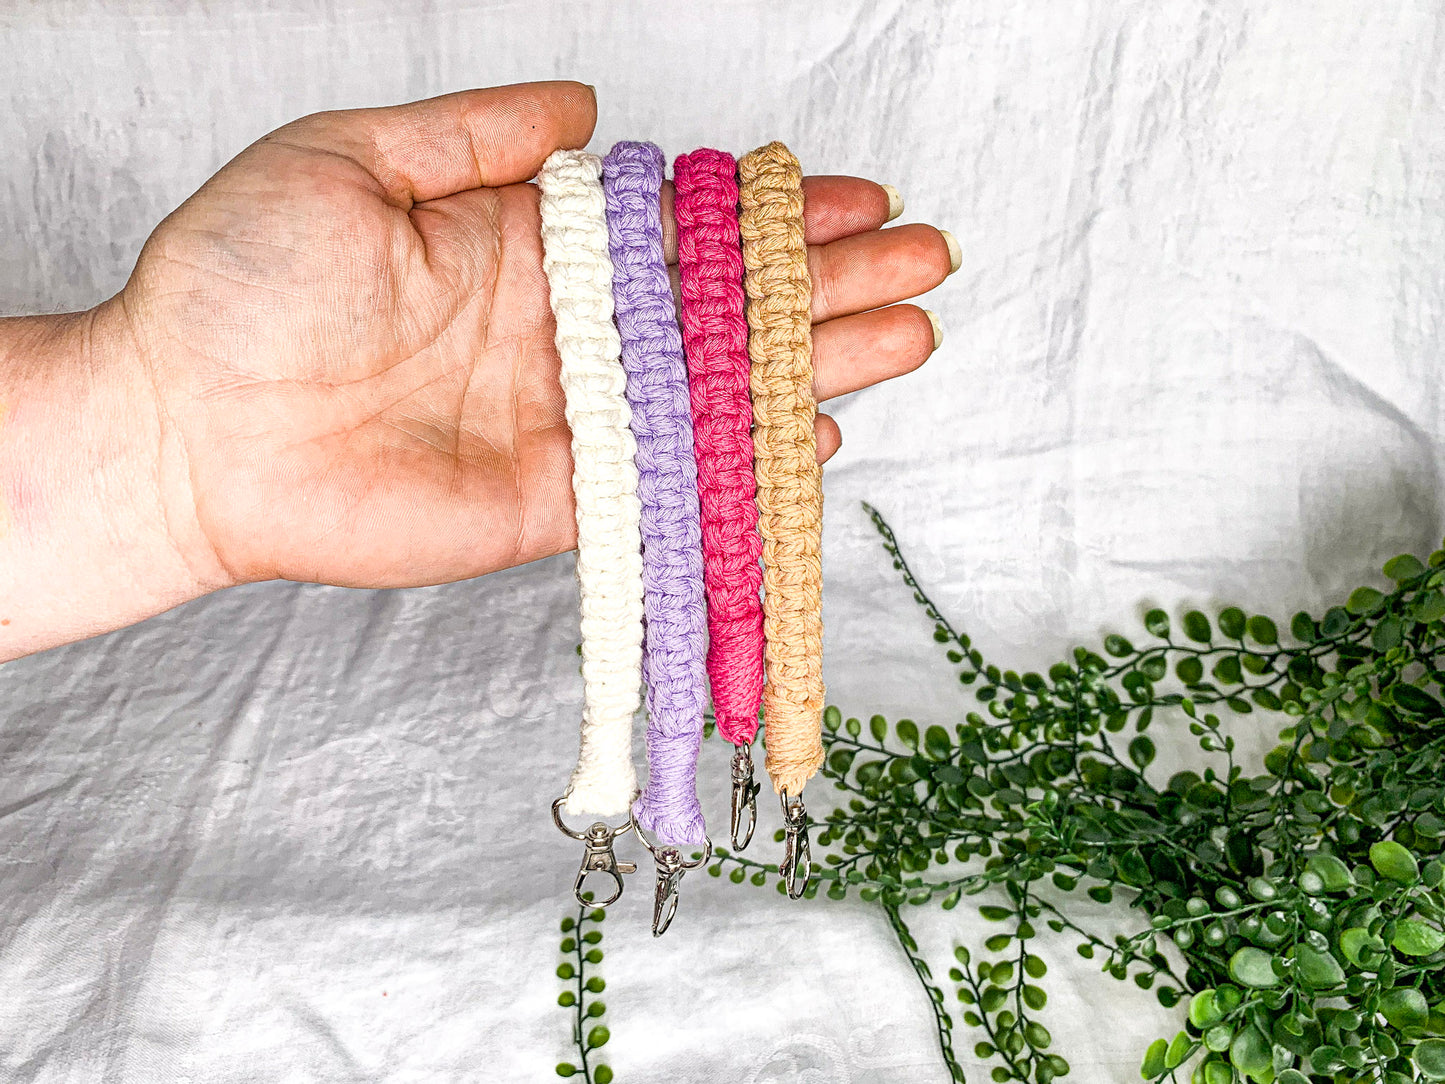 Square Knot Wristlet Keychains (Clearance)